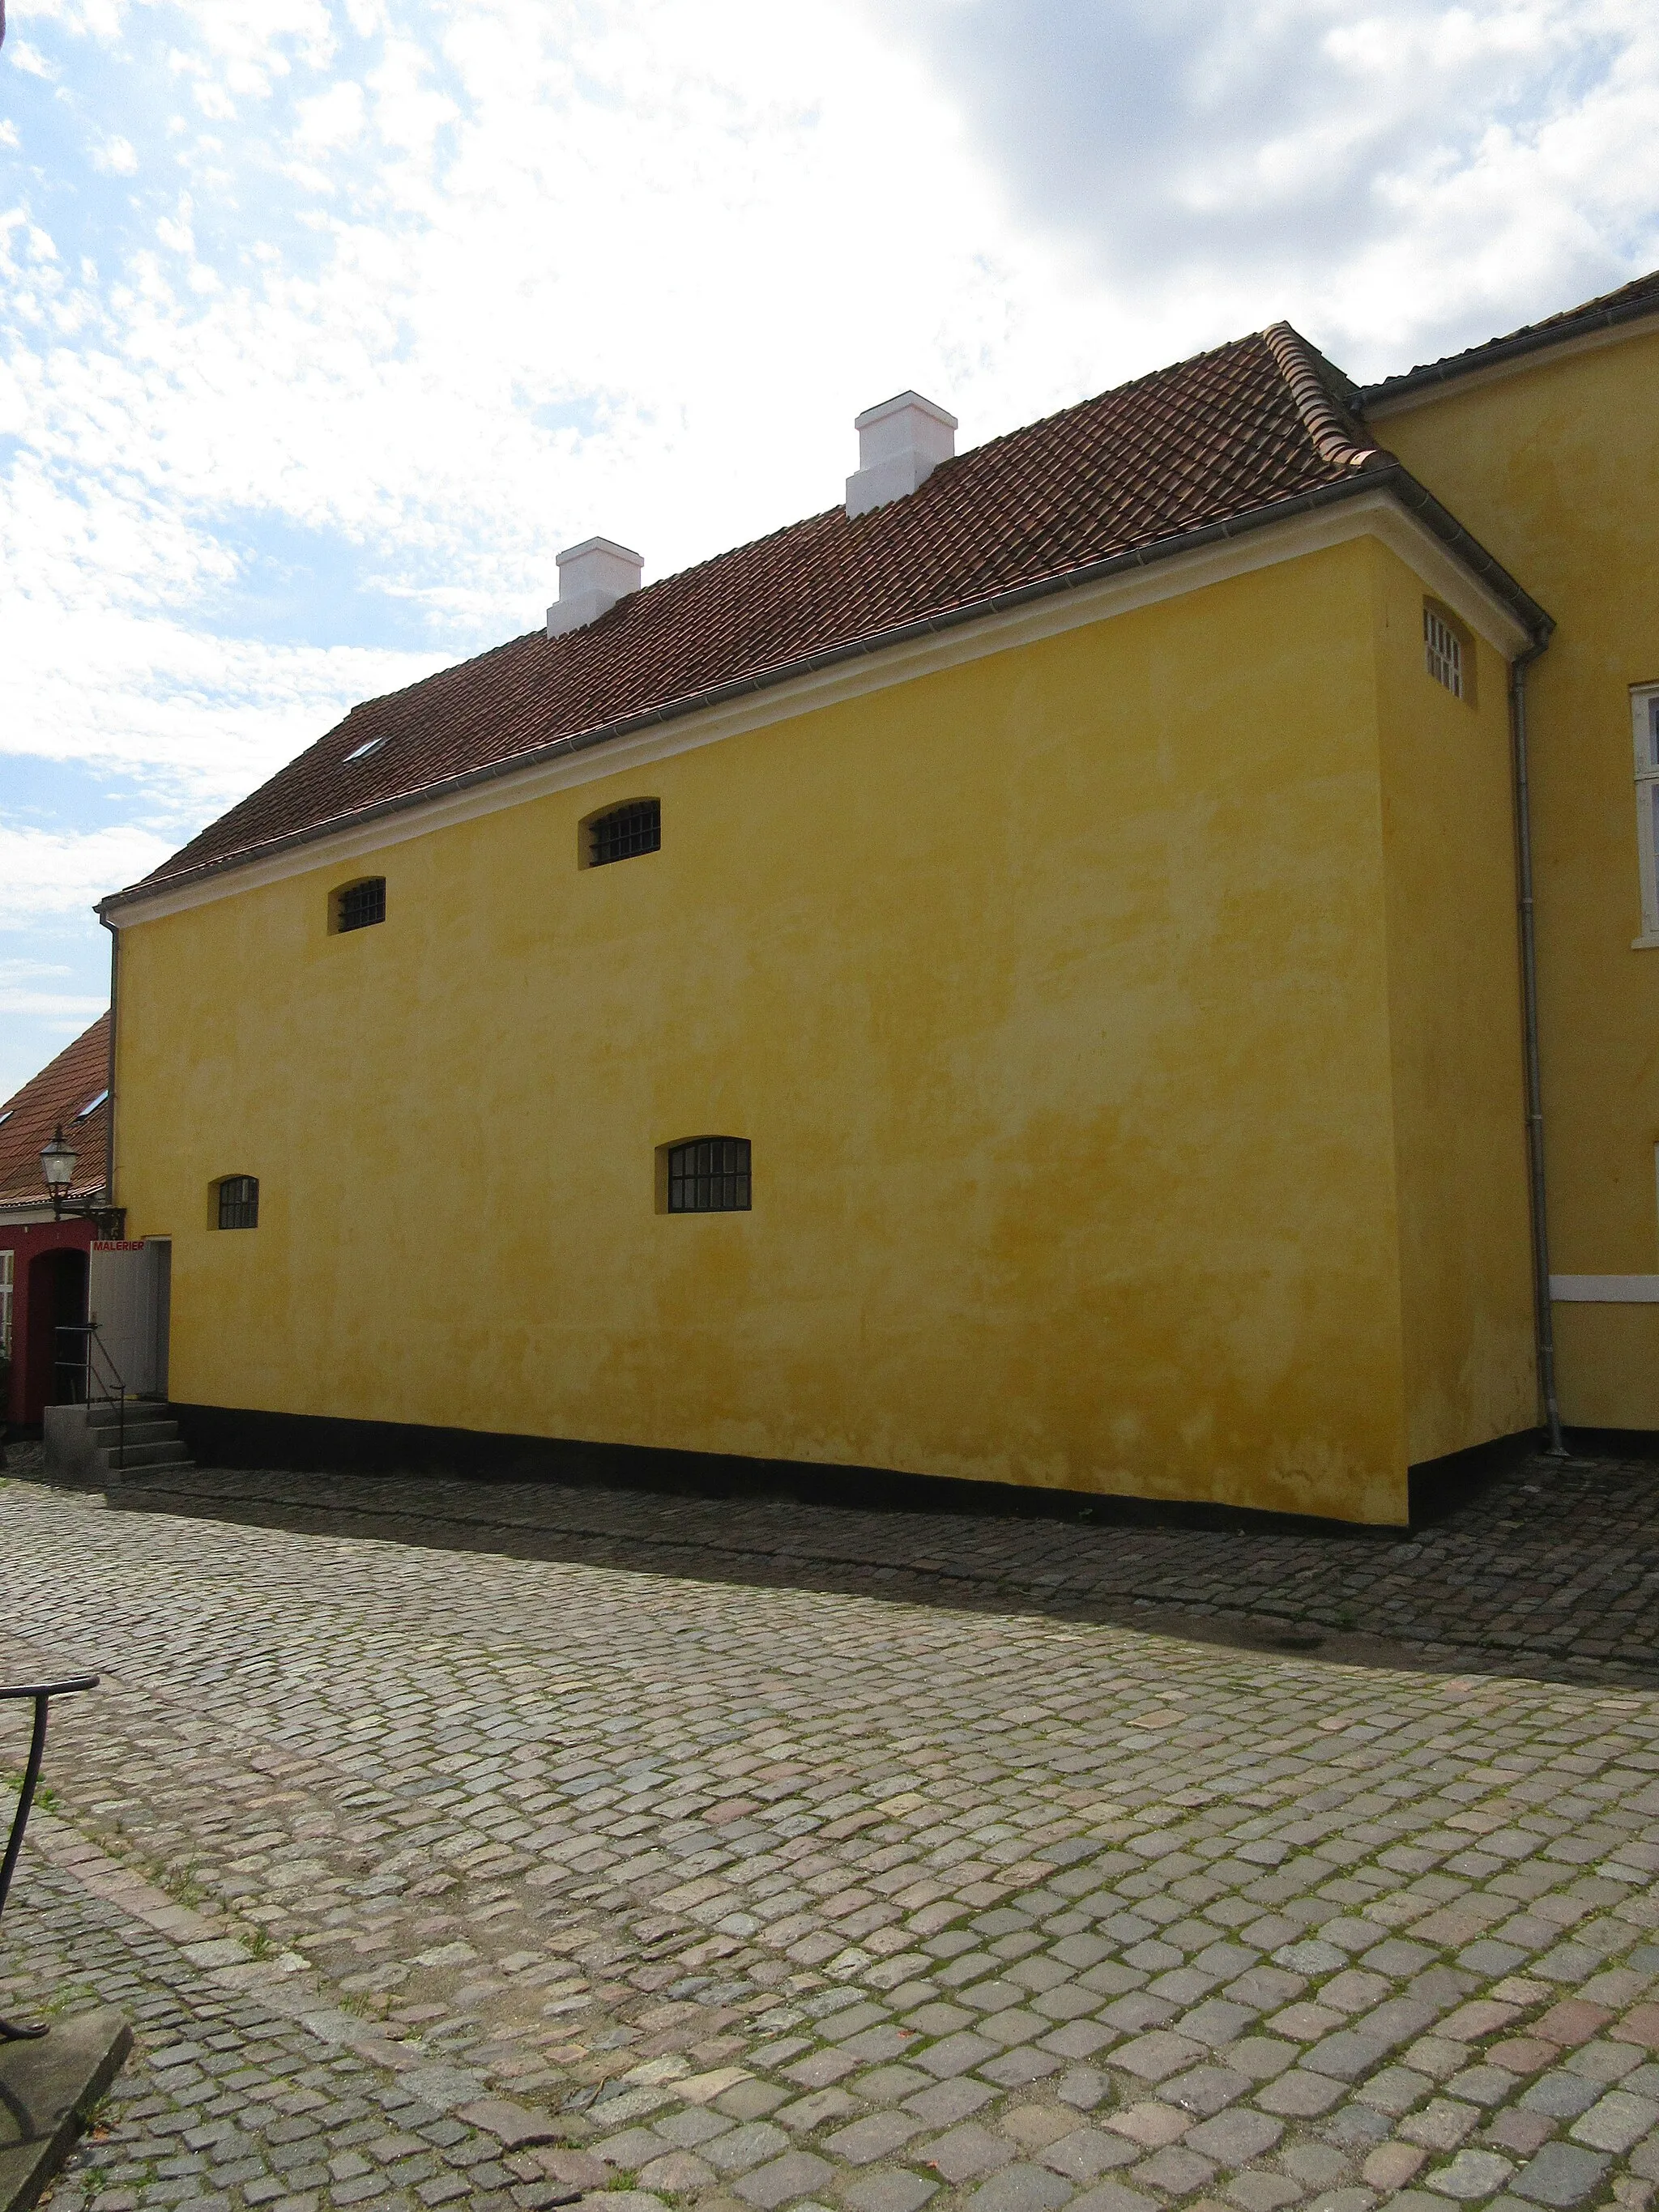 Photo showing: The former jailhouse of Præstø Town Hall in Præstø, Denmark